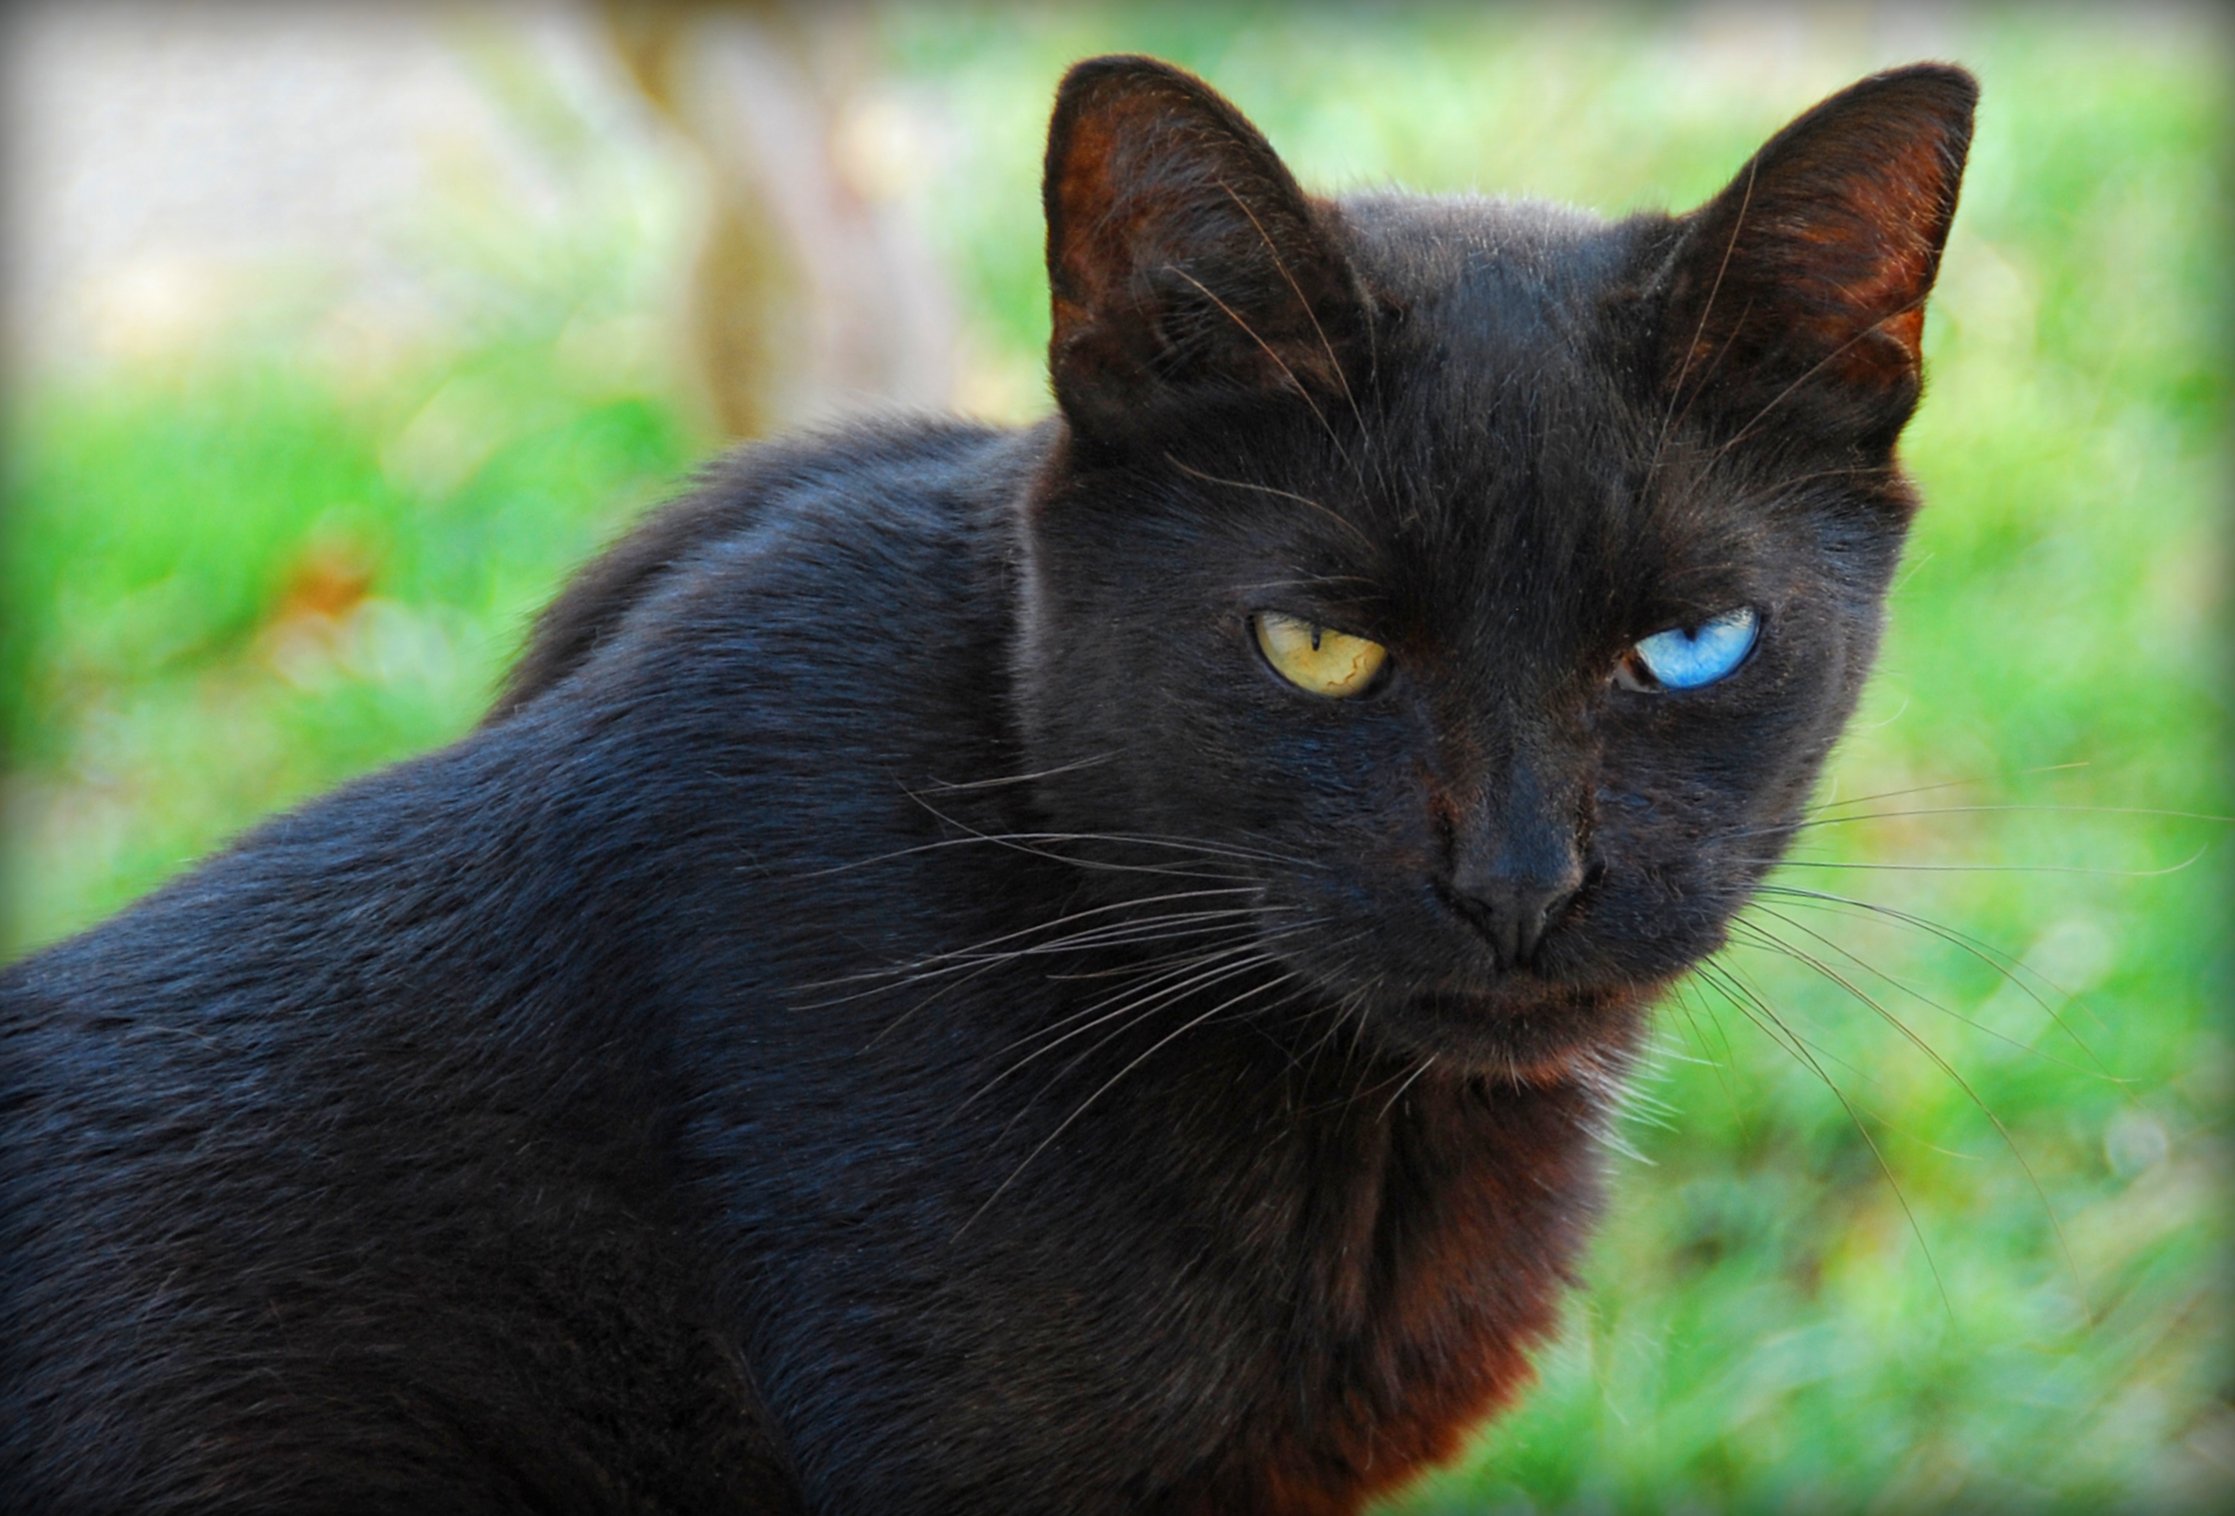 File:Odd Eyed Black Cat looks at viewer.jpg - Wikimedia Commons